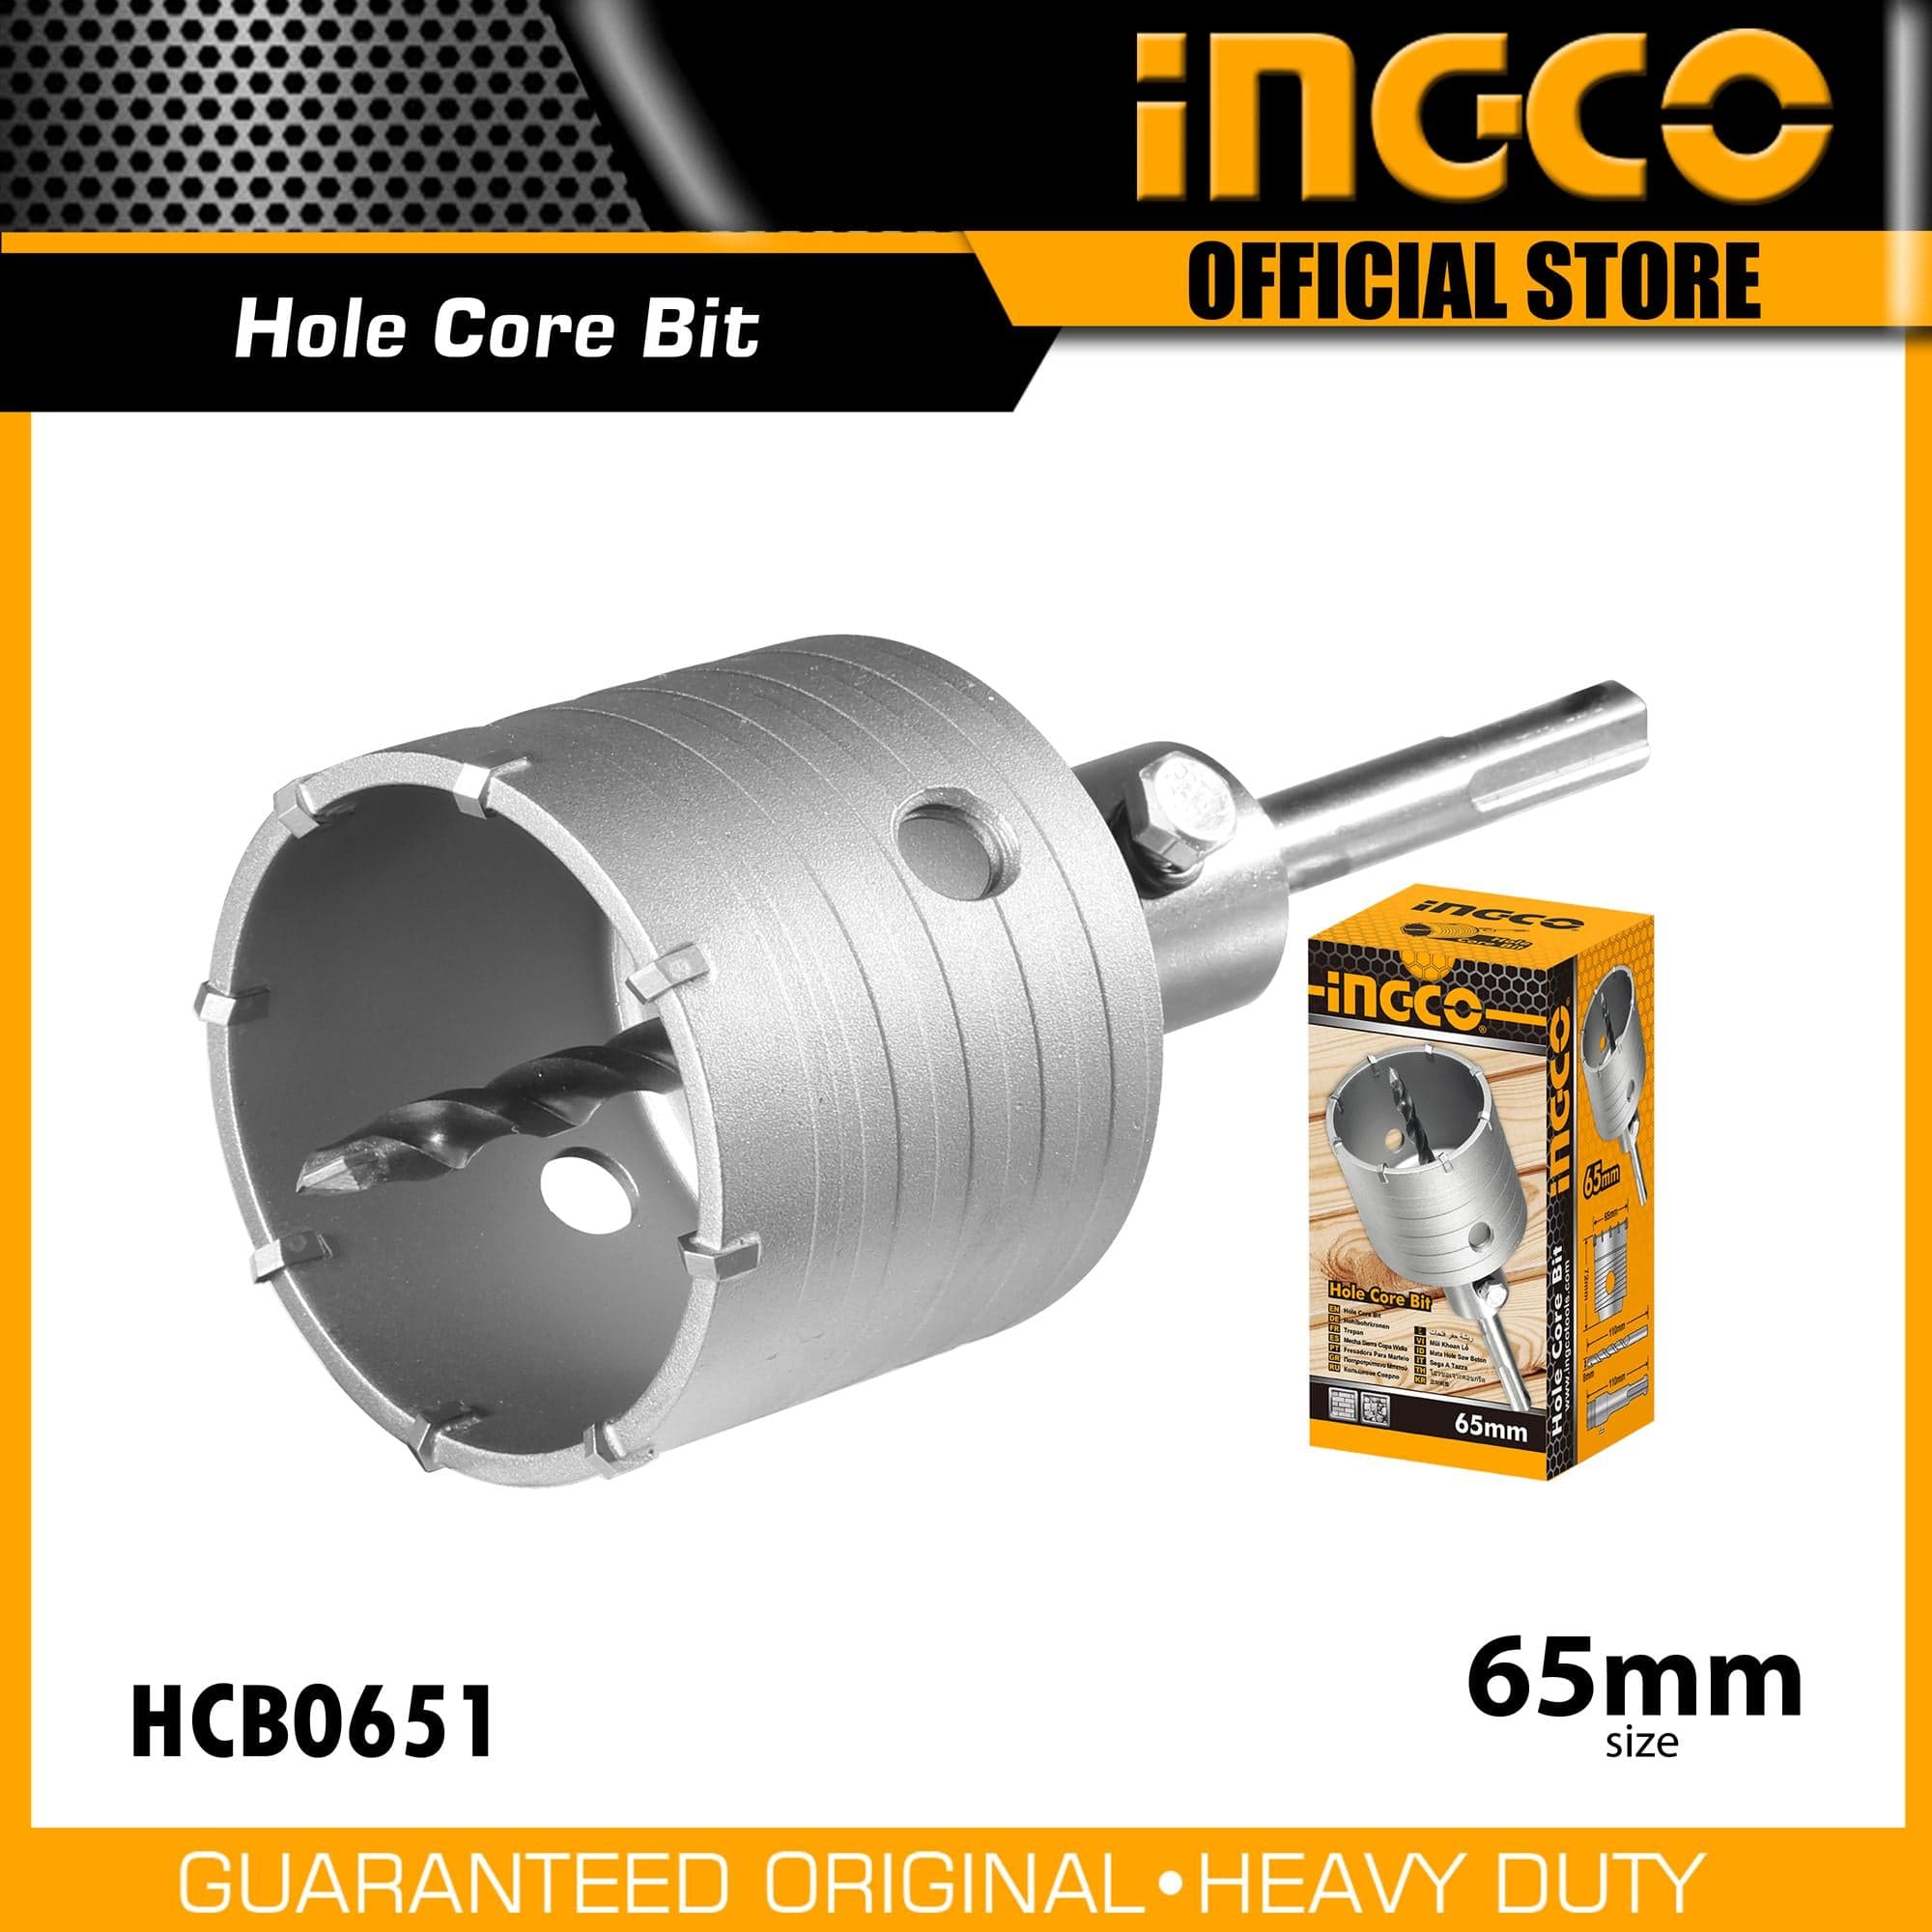 Ingco Hole Core Bit 65mm - HCB0651 | Buy Online in Accra, Ghana - Supply Master Hole Saws & Cores Buy Tools hardware Building materials